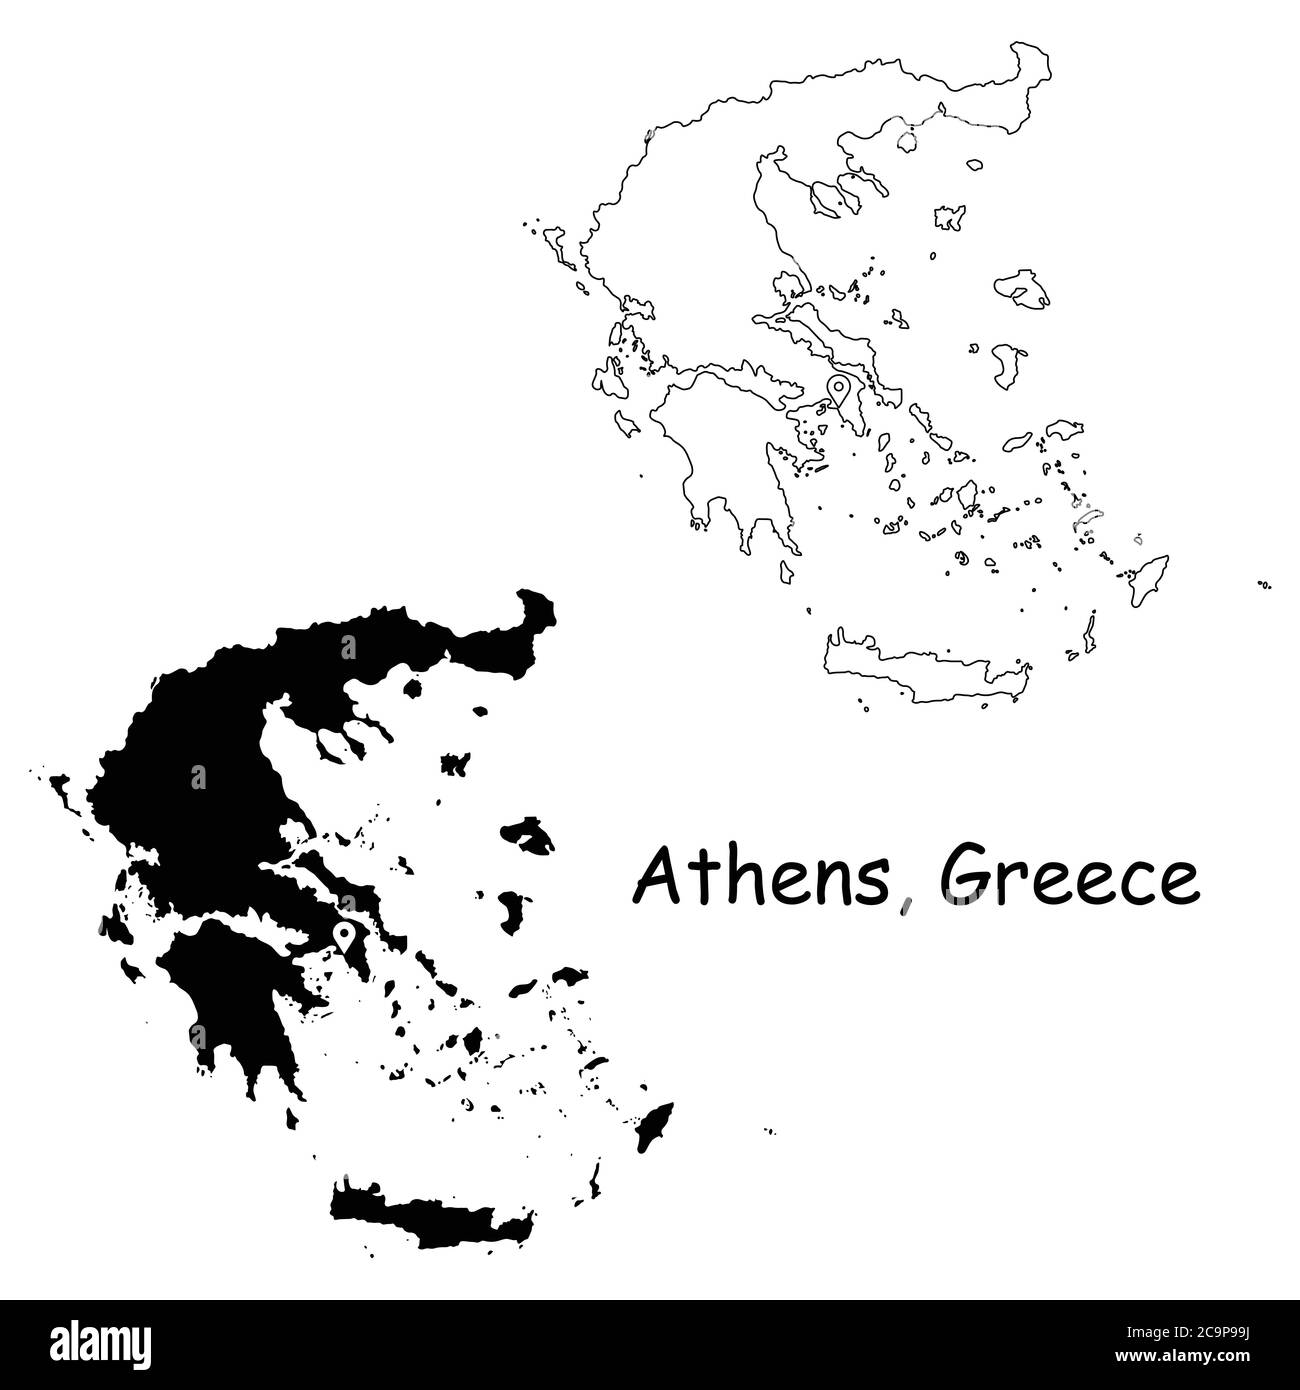 Athens Greece. Detailed Country Map with Location Pin on Capital City. Black silhouette and outline maps isolated on white background. EPS Vector Stock Vector